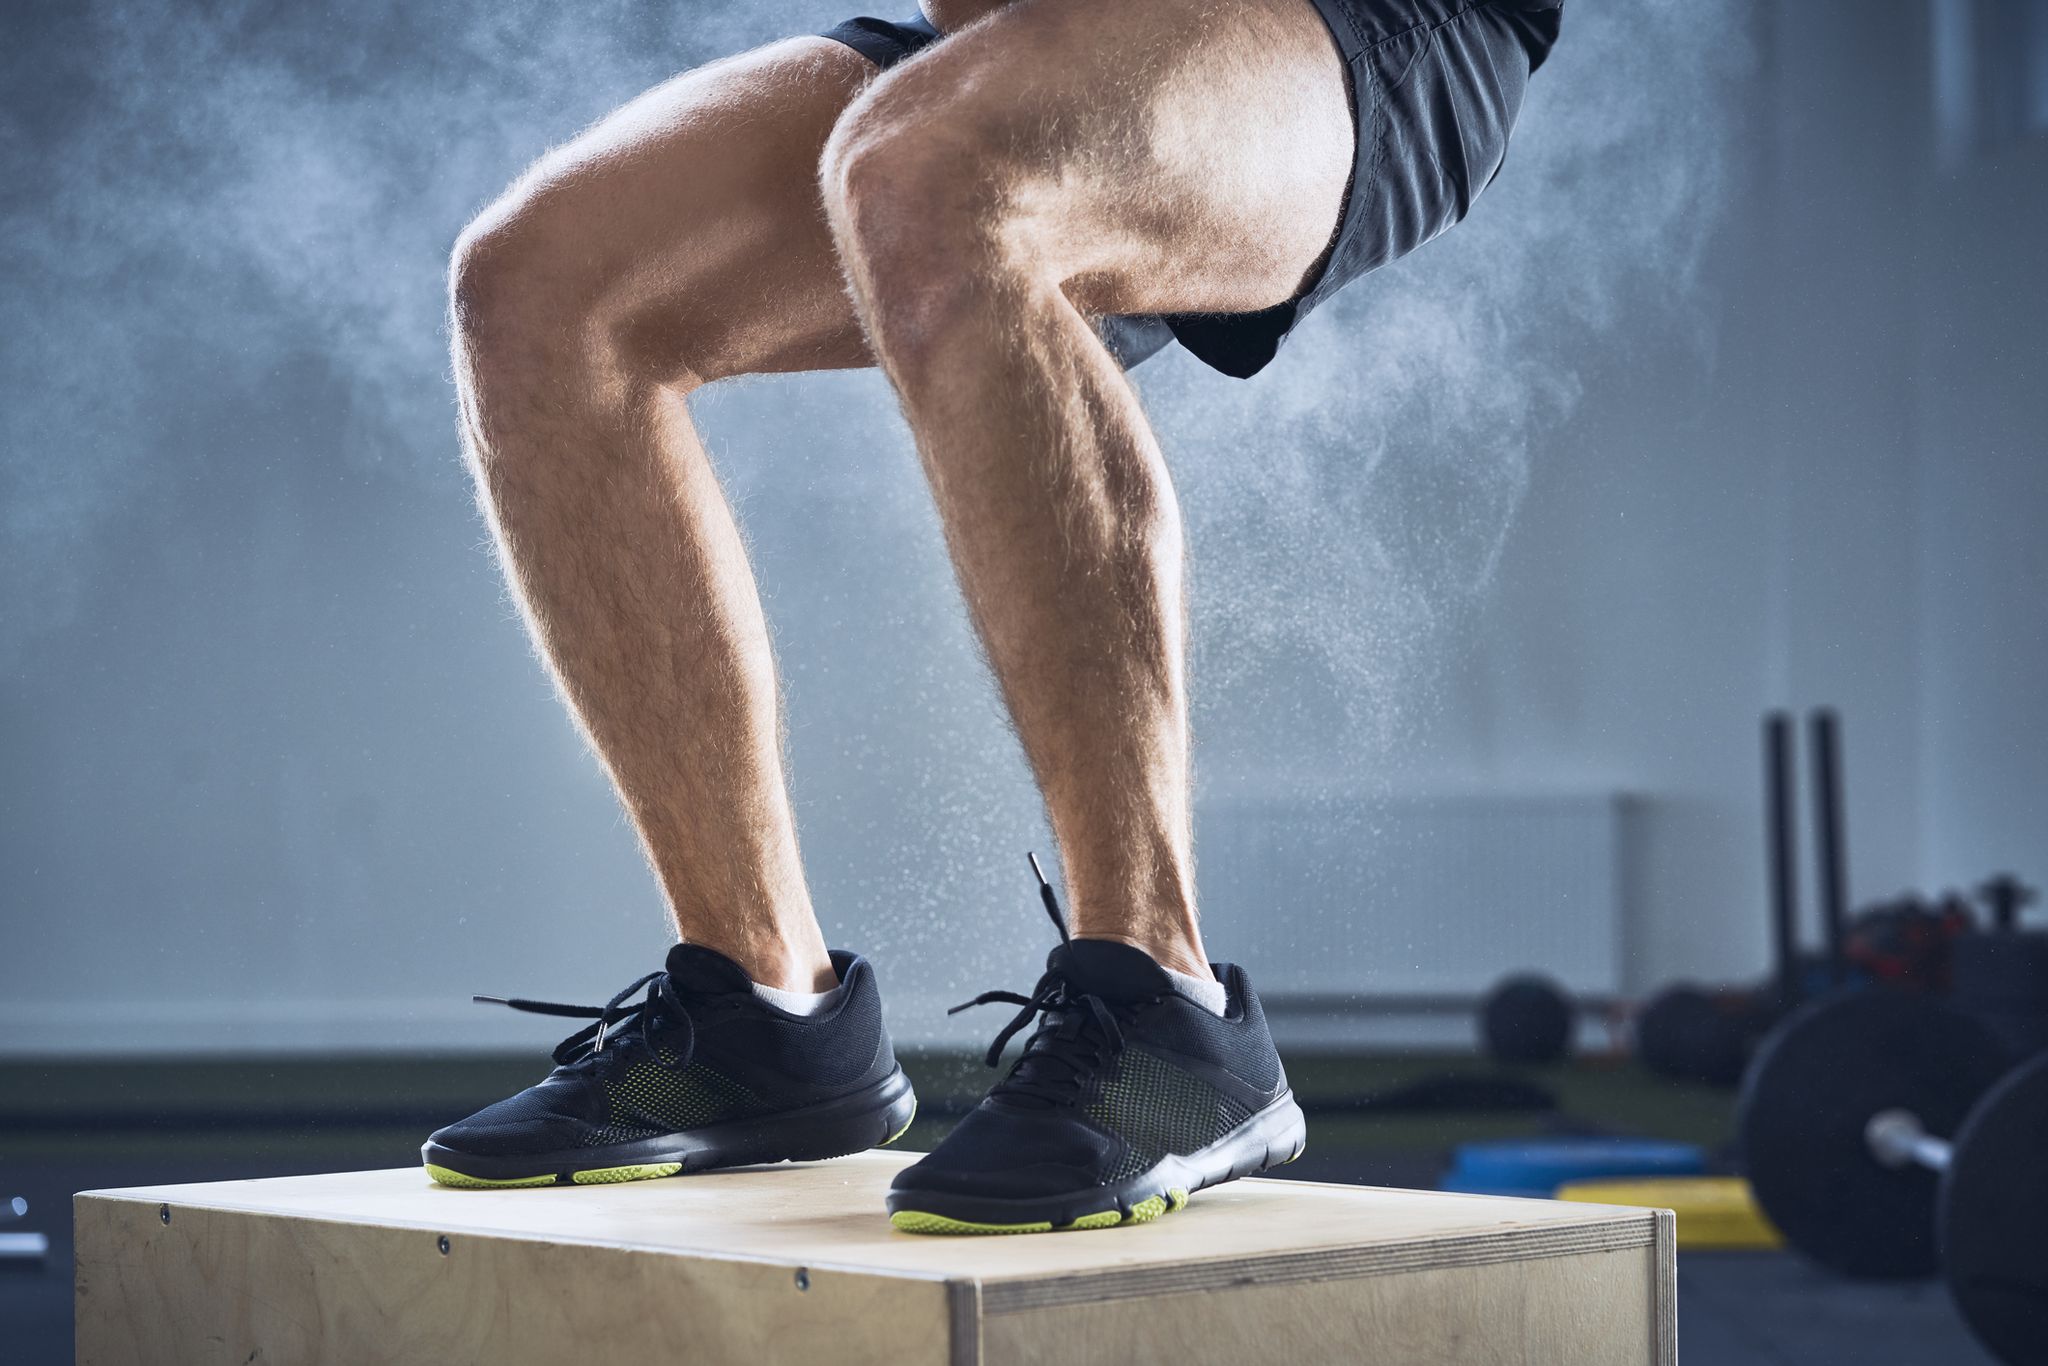 7 Best Unilateral Exercises for Strong Legs